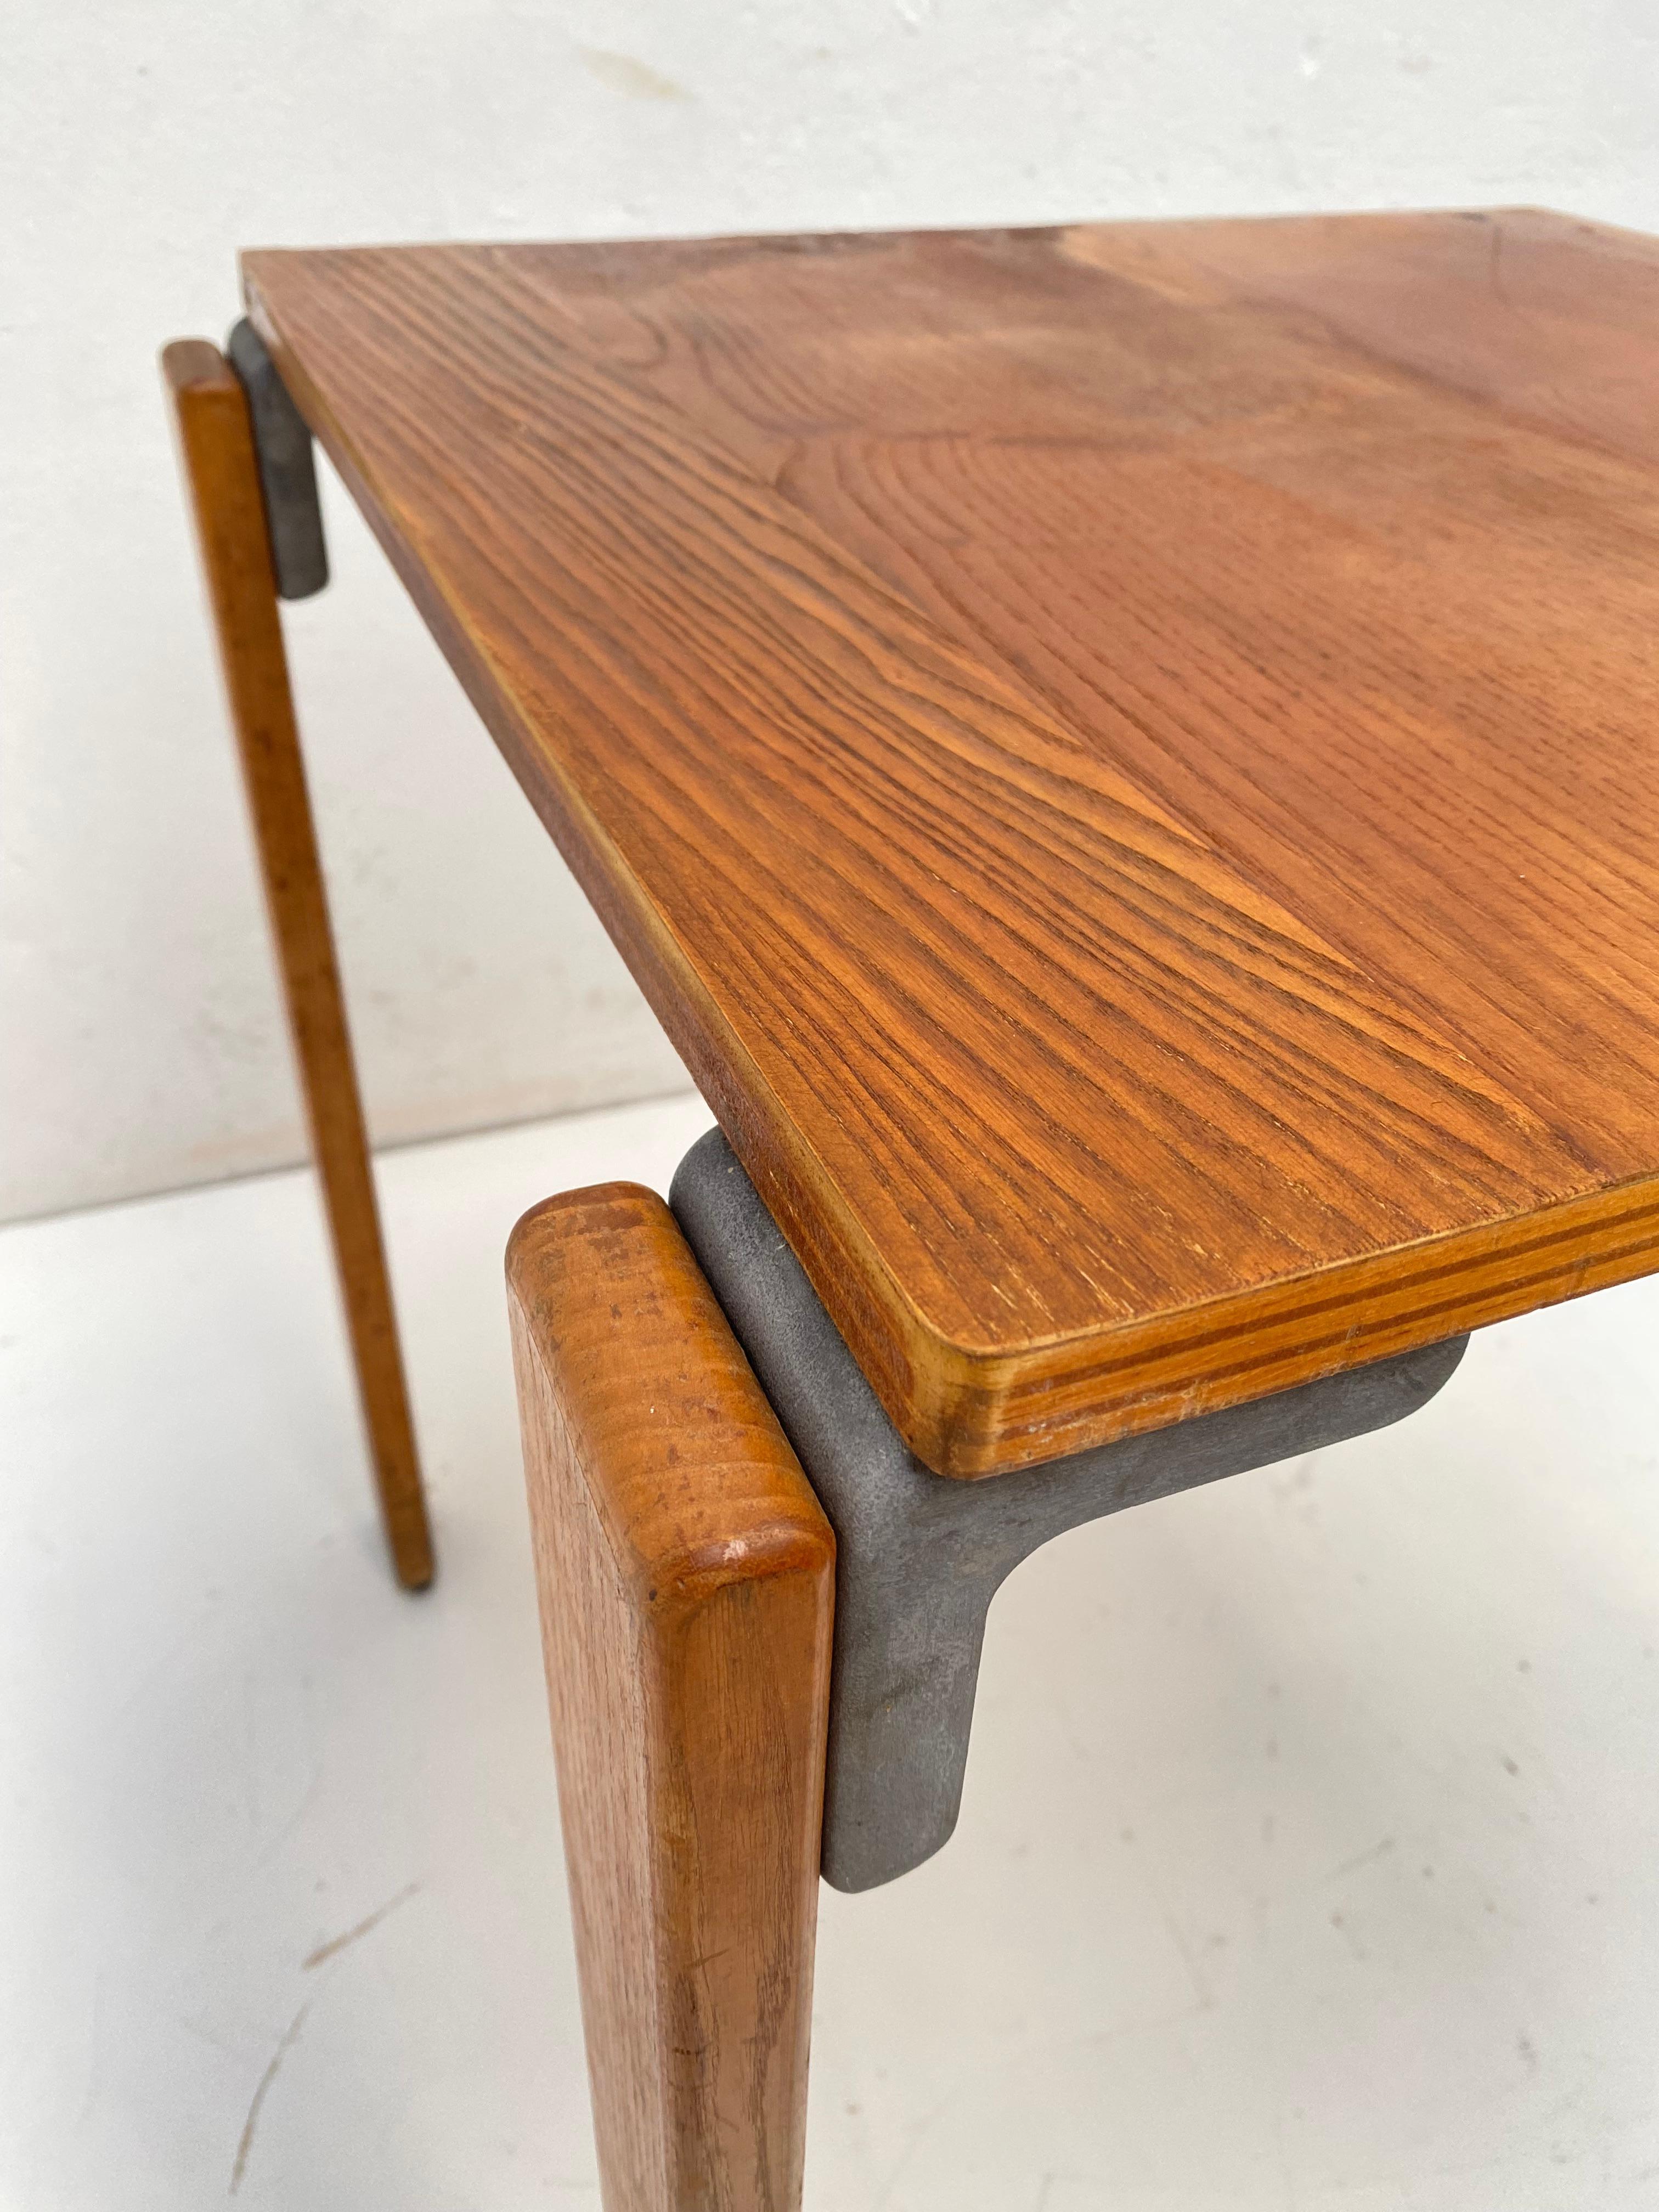 Very Rare George Candilis Dining Table  'Les Carrots' Port Leucate France 1968 For Sale 6